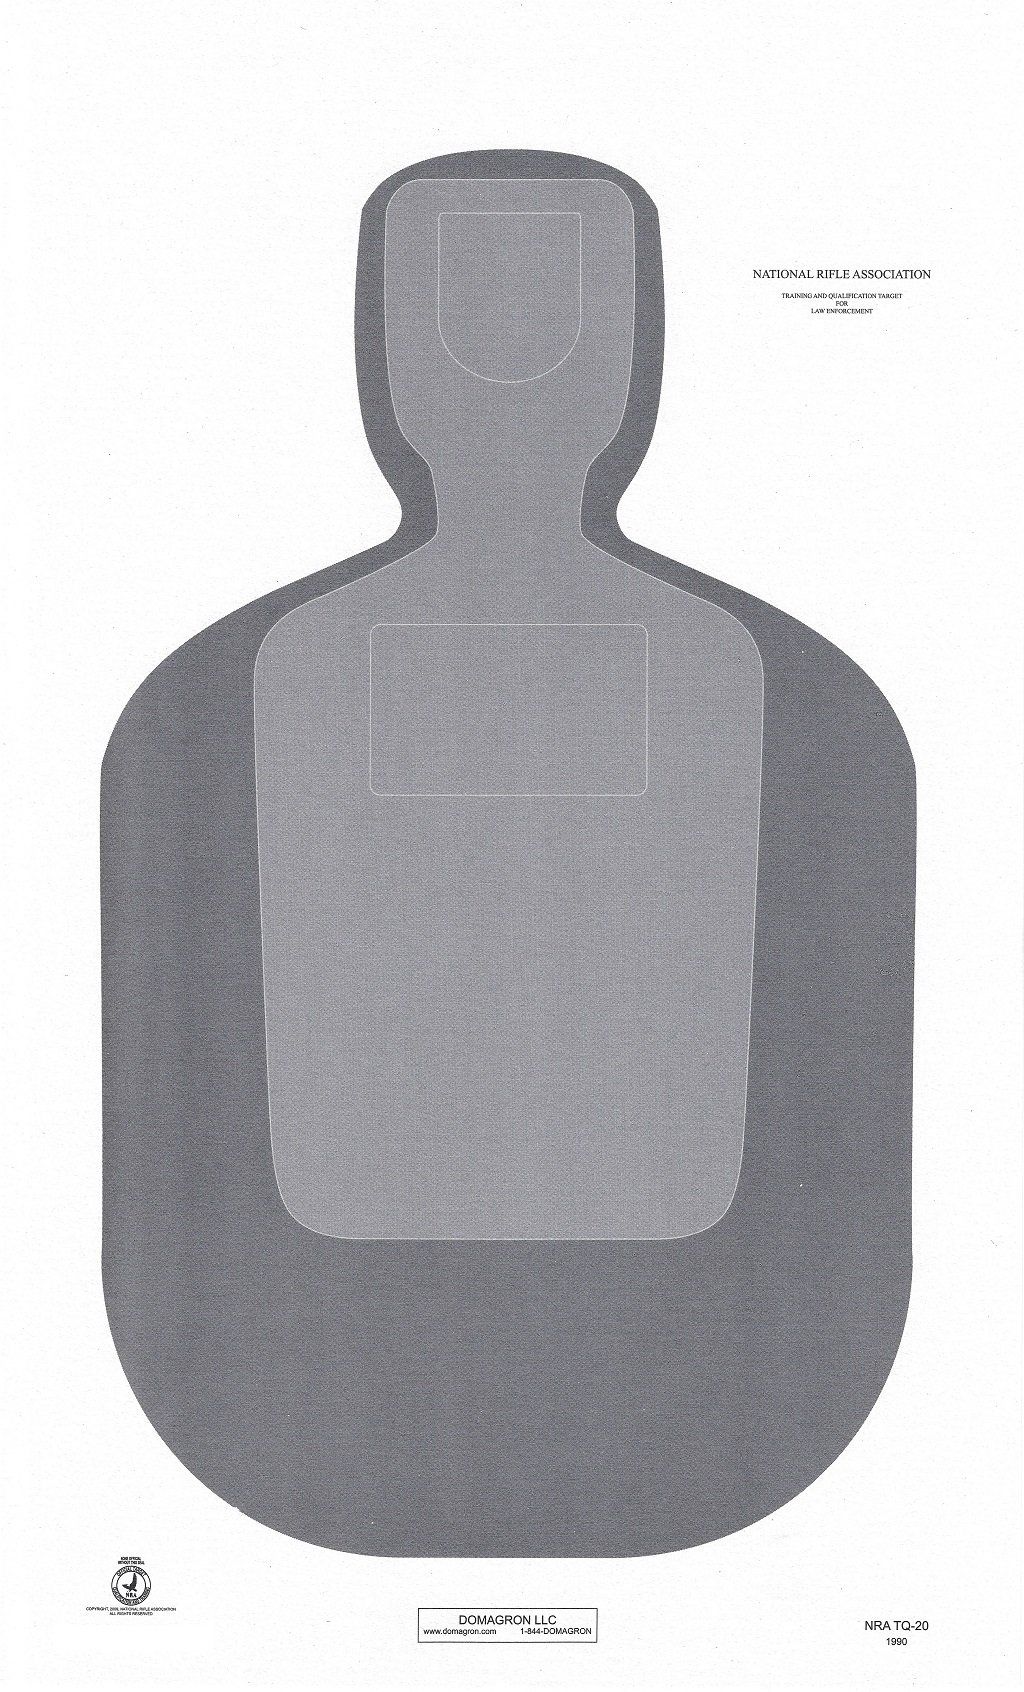 TQ-20  Official NRA Police Training and Qualification Target (pack of 100)